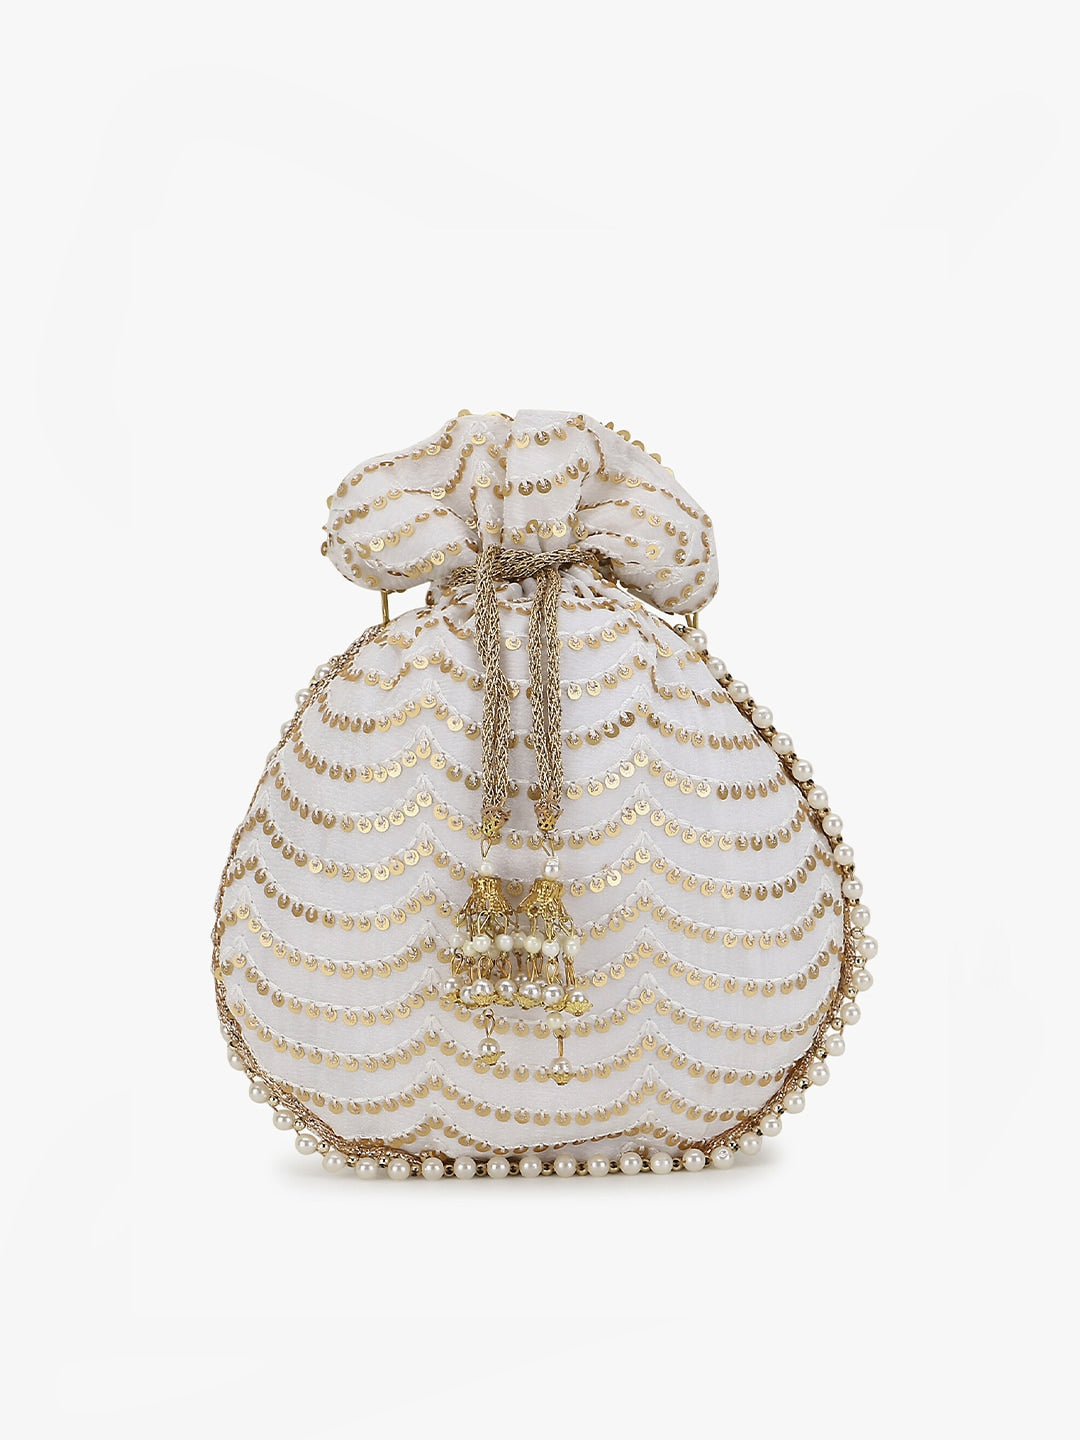 Anekaant Off White & Gold-Toned Embellished Tasselled Potli Clutch - Distacart